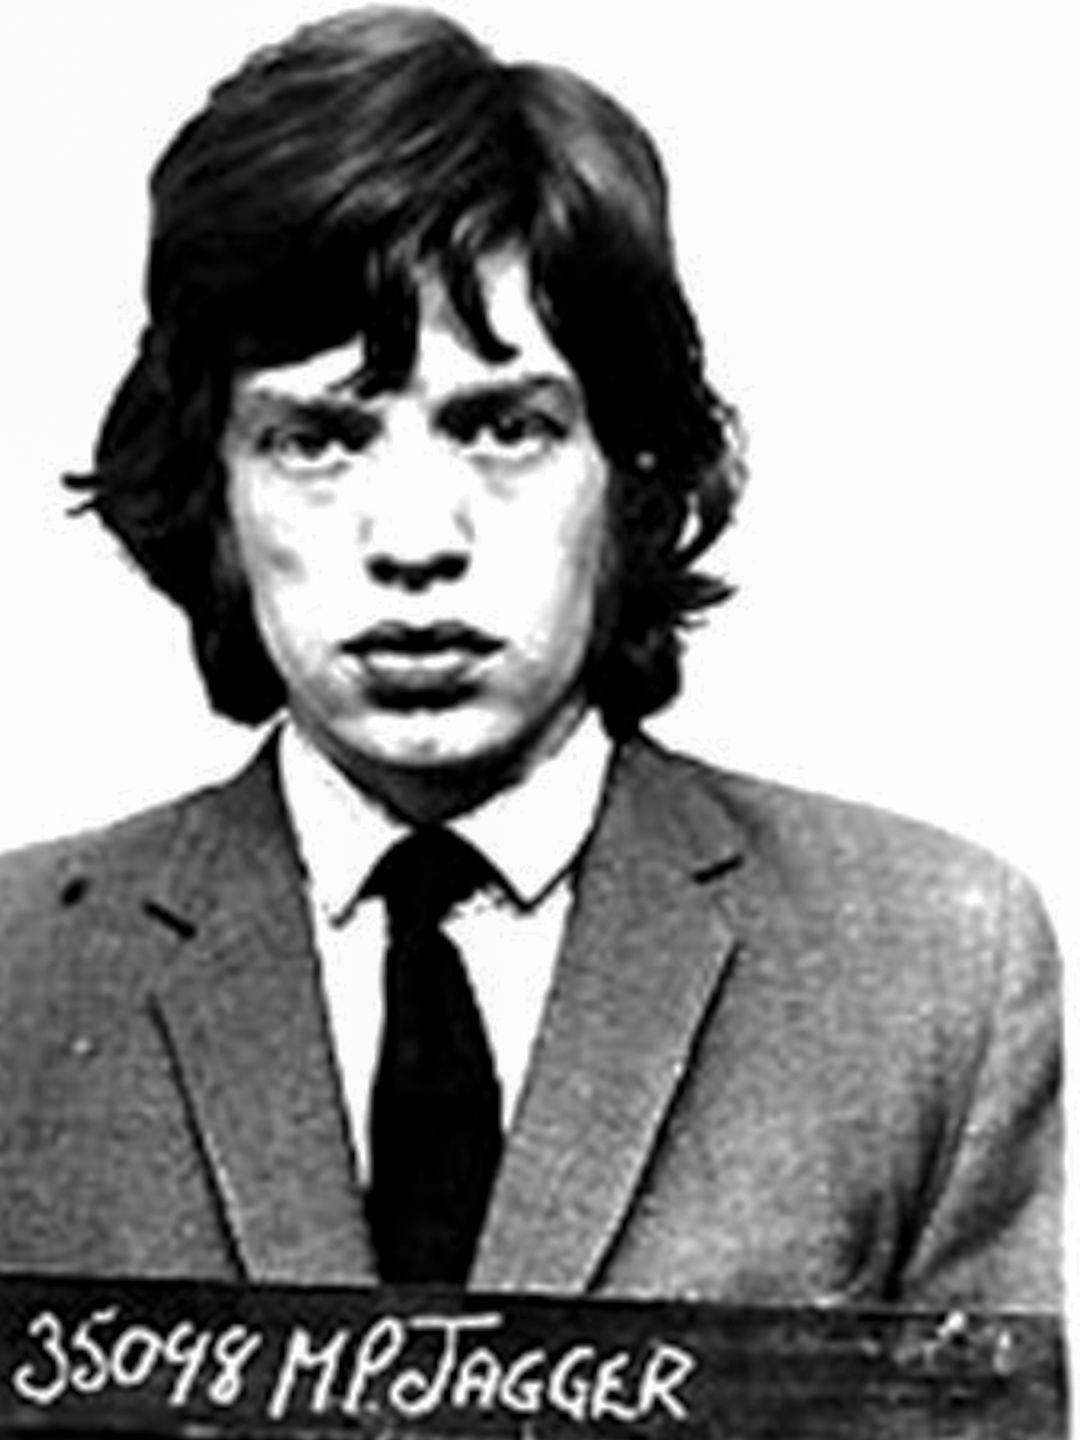 Black-and-white phot of Mick Jagger's mugshot, he wears a suit and tie